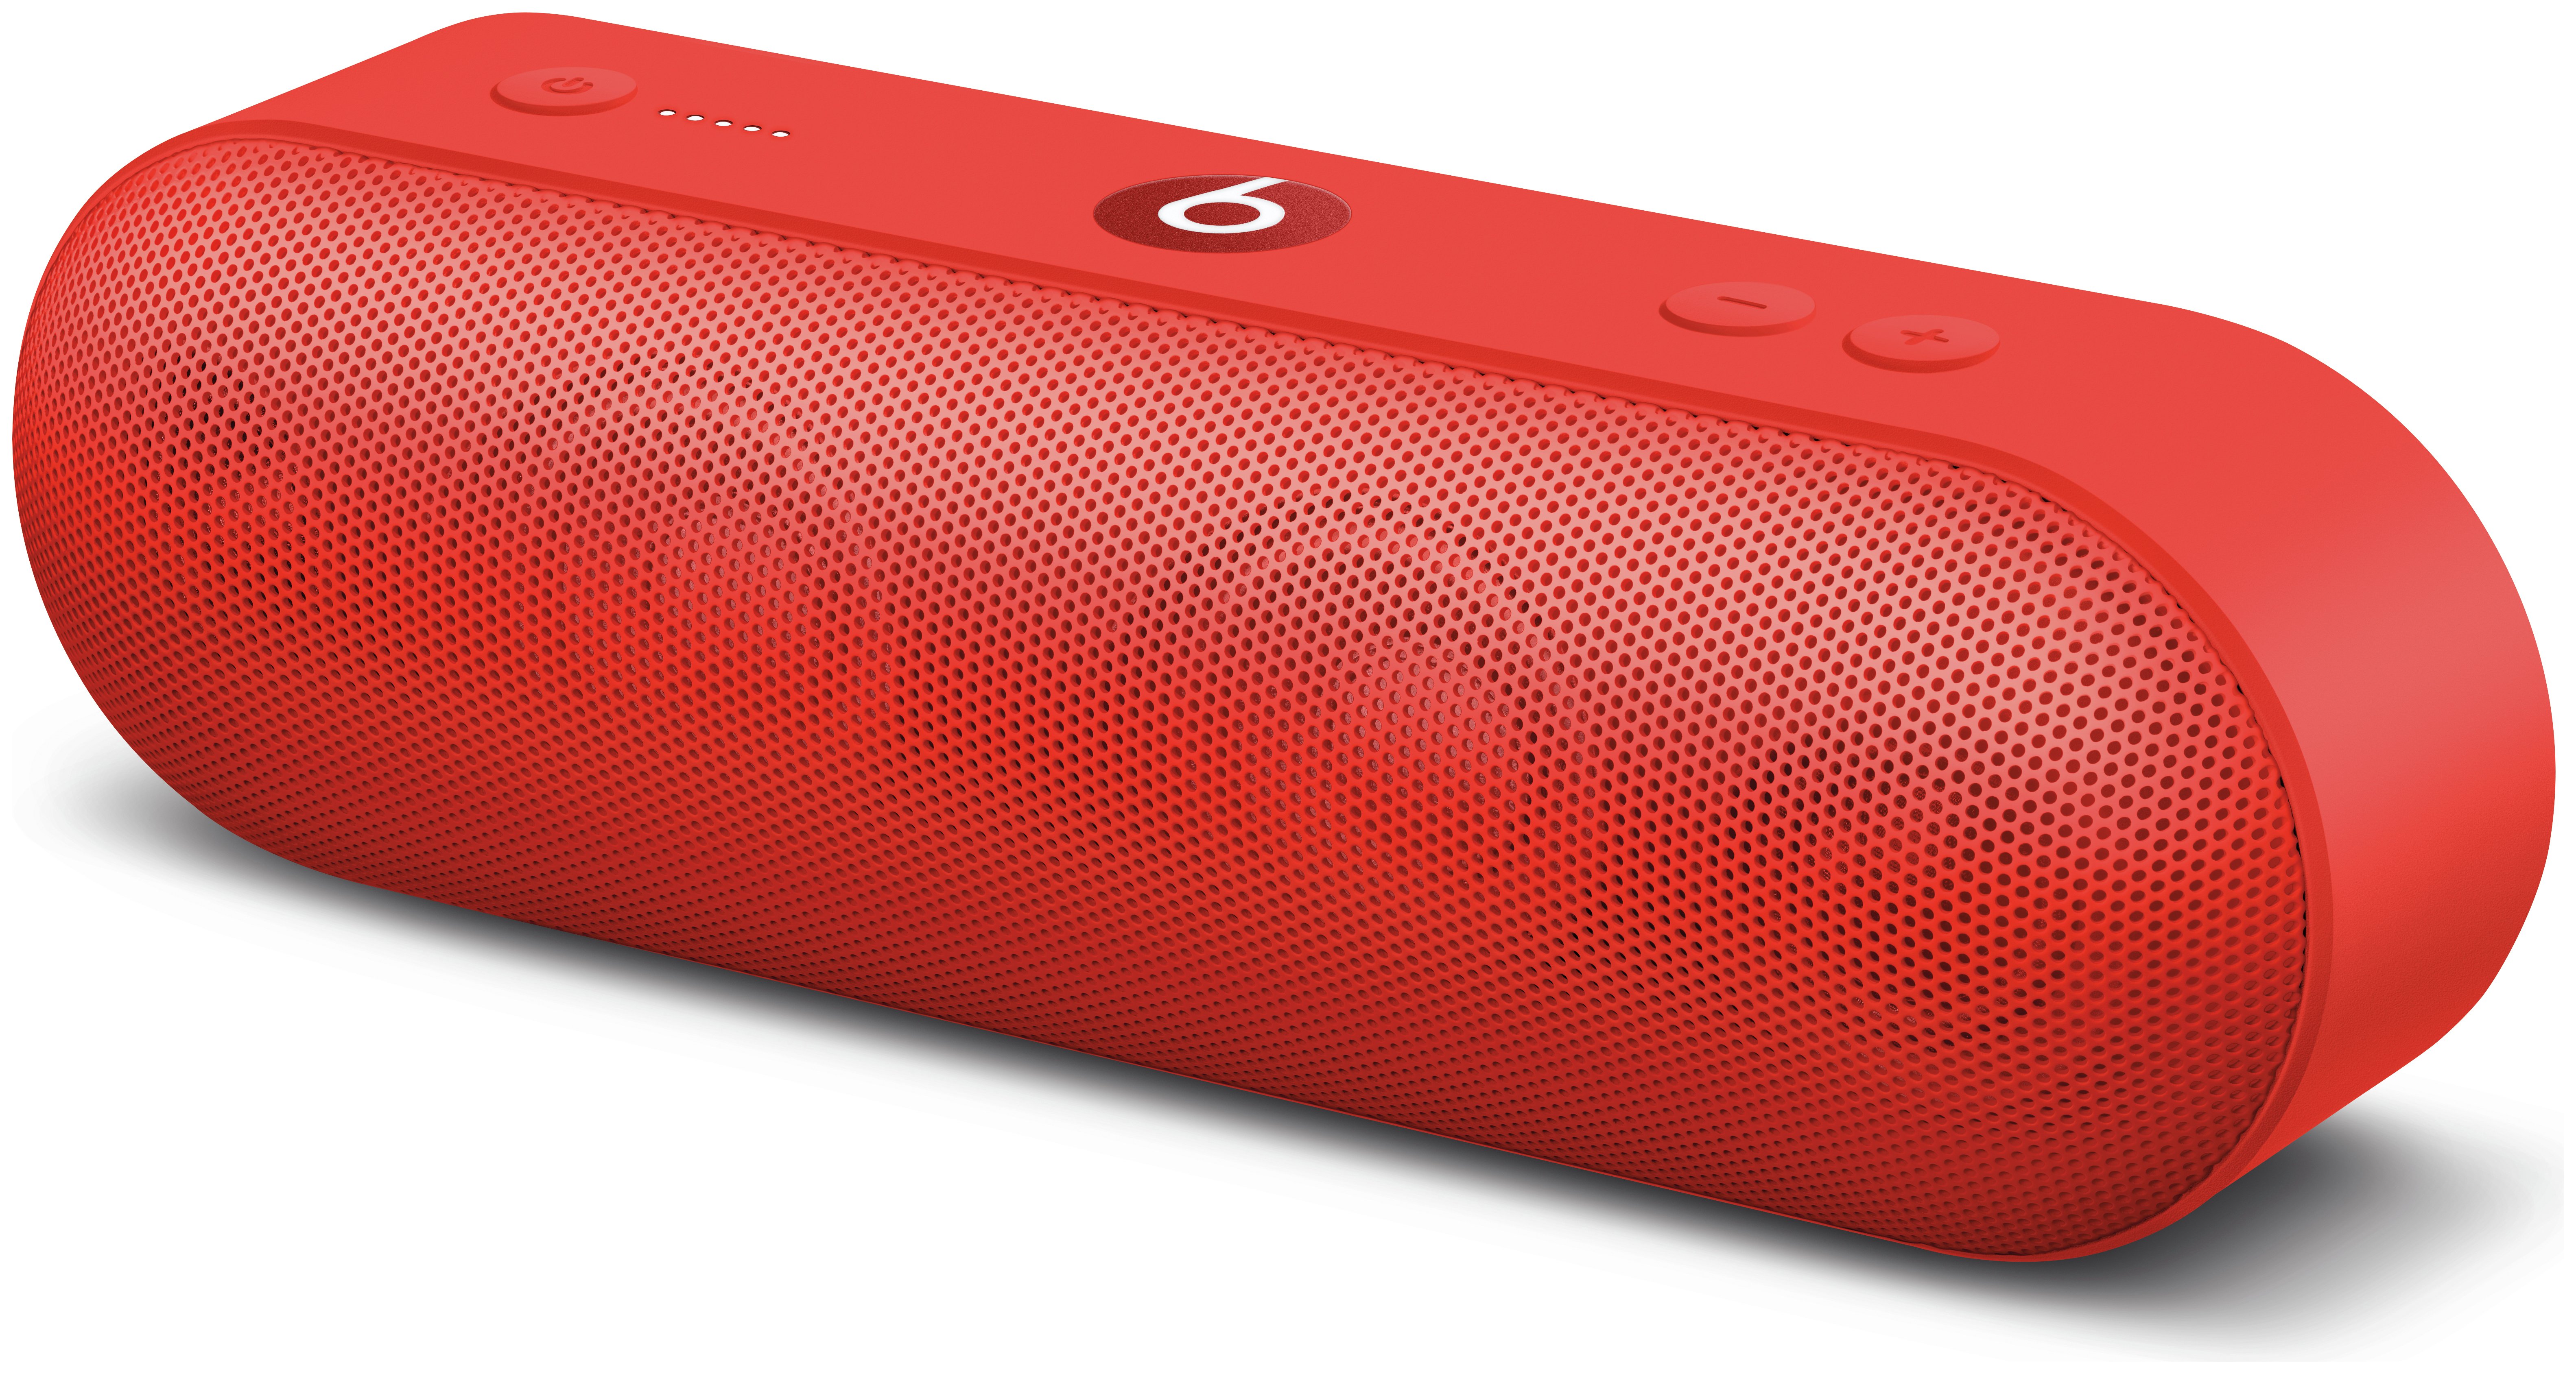 Beats Pill+ Portable Bluetooth Stereo Speaker - Citrus Red. Review